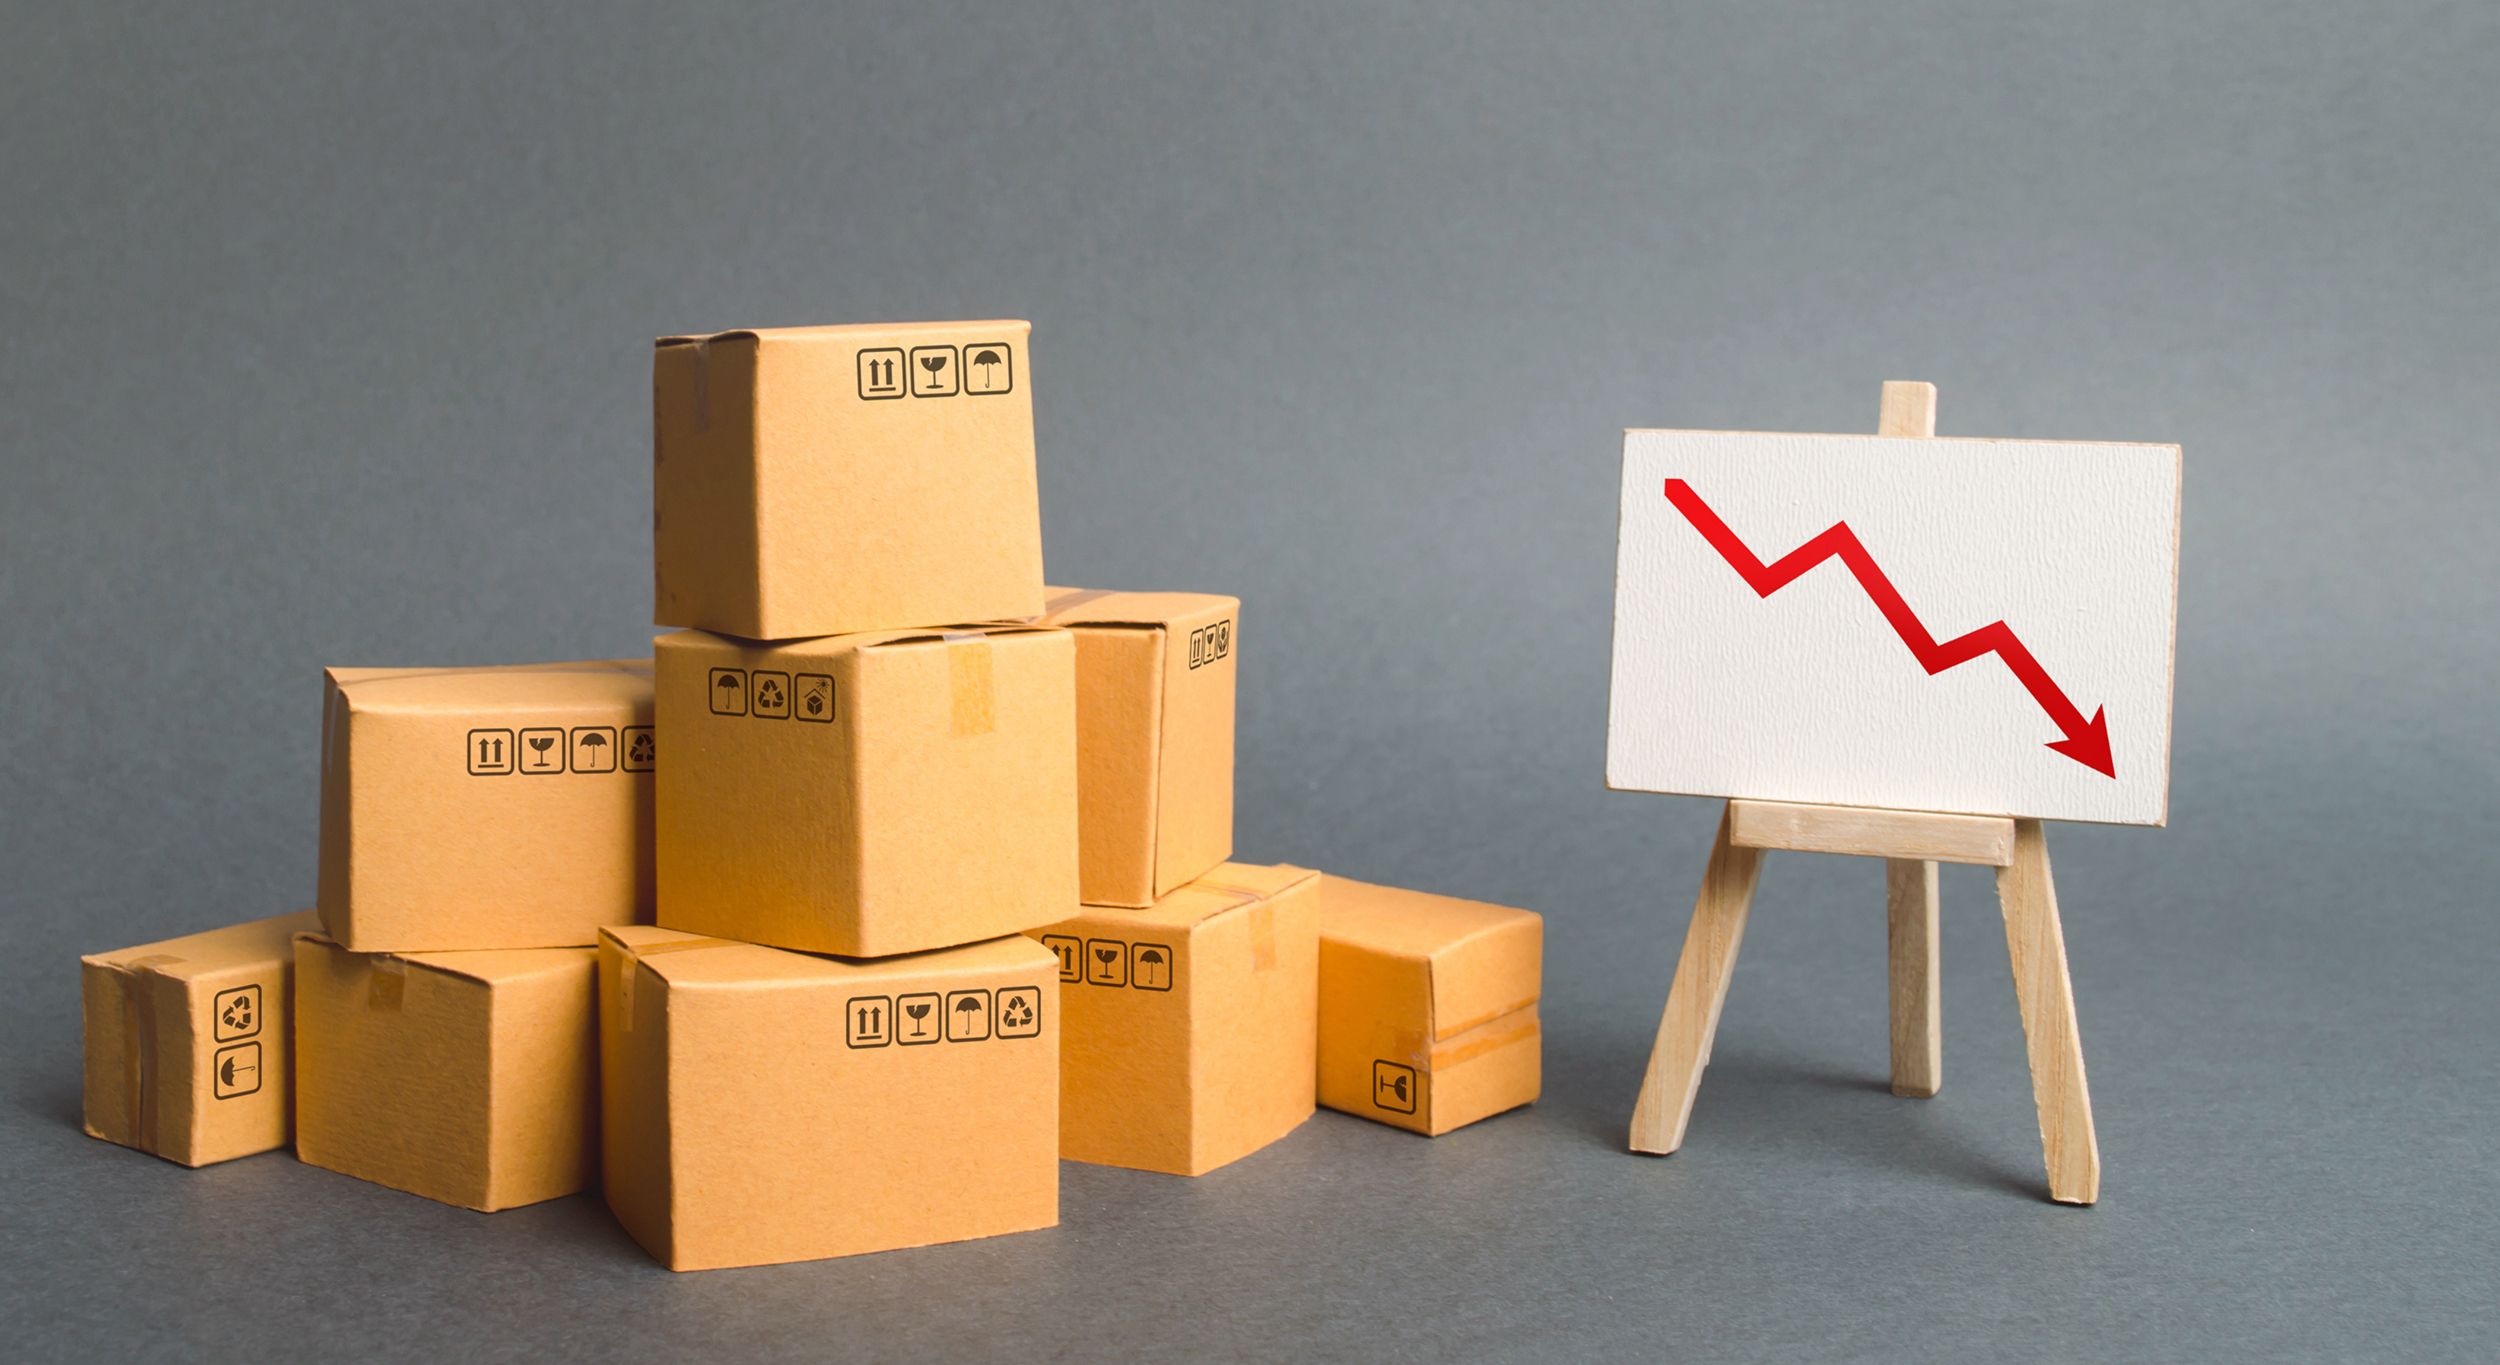 A pile of cardboard boxes and easel with red arrow down. Decrease in the quality, price, quantity and competitiveness of goods and products. Concept drop in industrial production, sales fall.